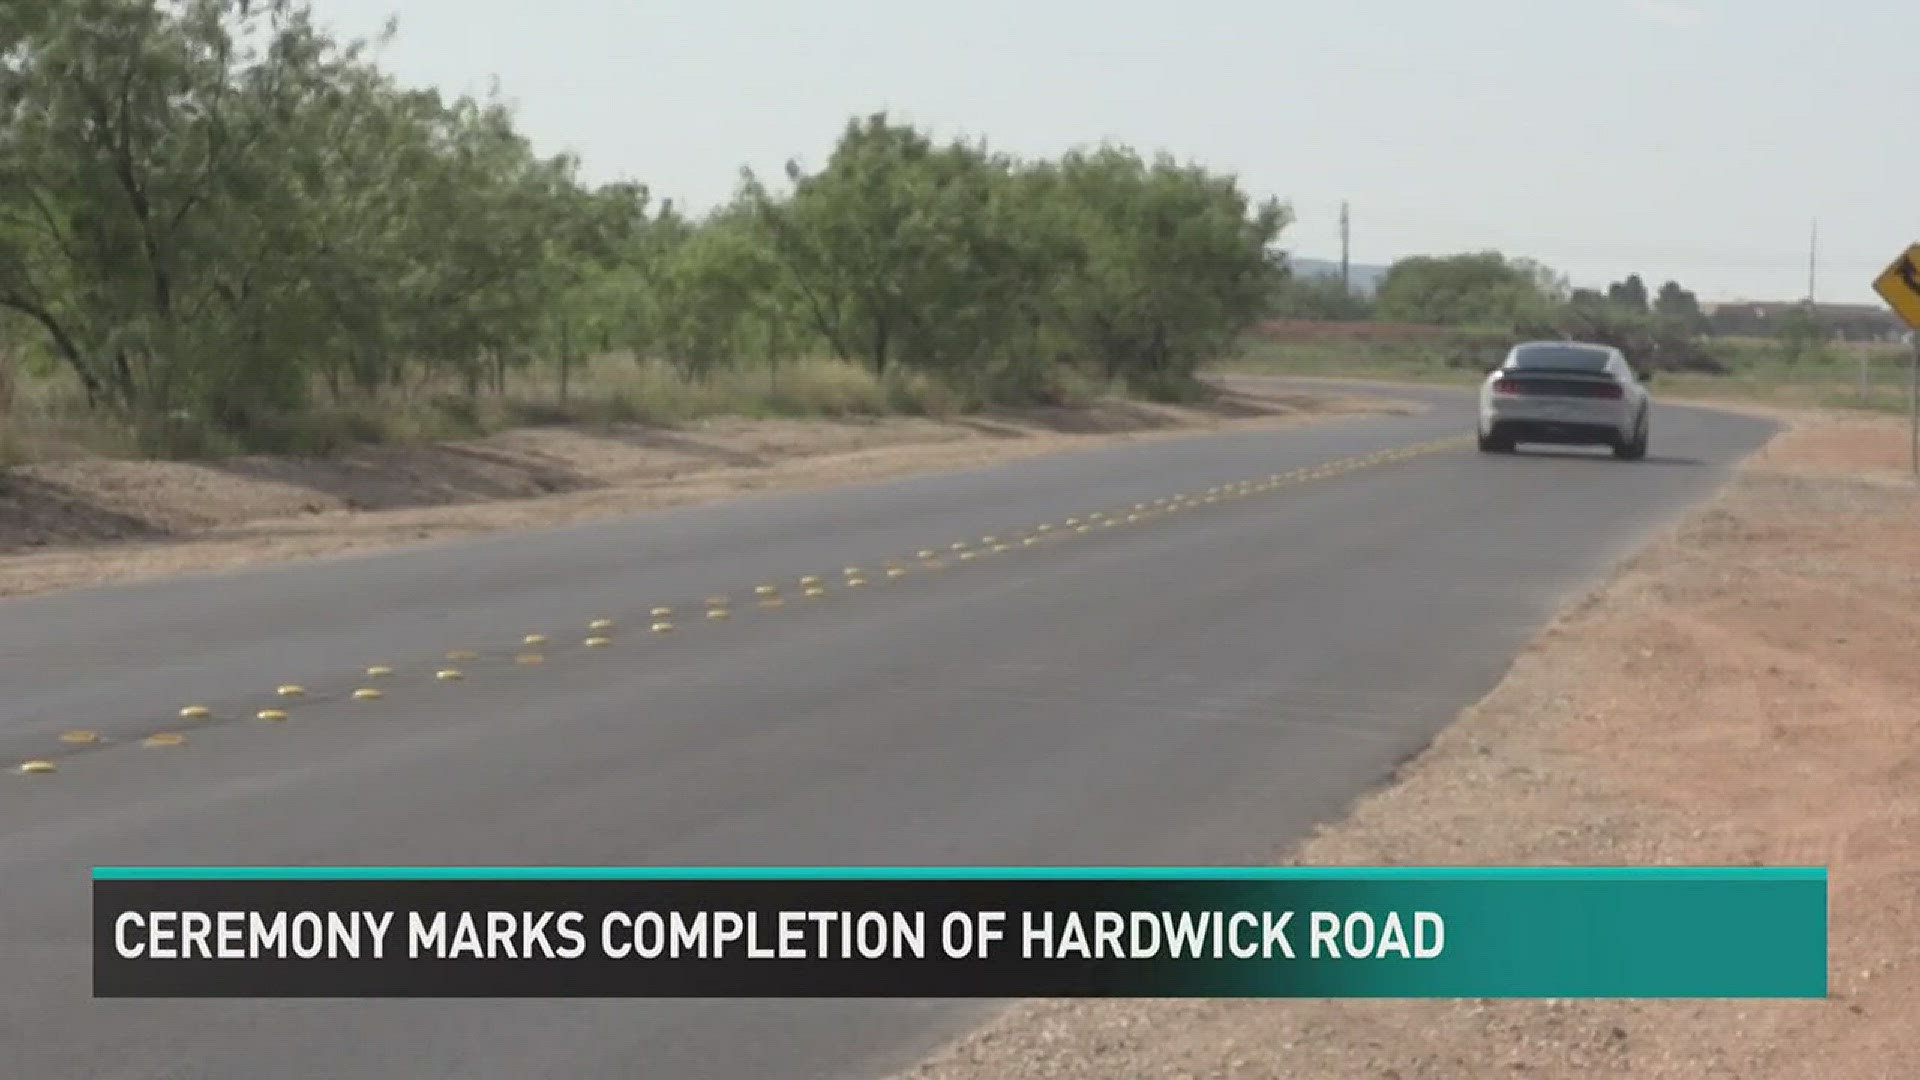 The construction on Hardwick Road is officially finished. This project was completed on schedule and under the initial bid price.